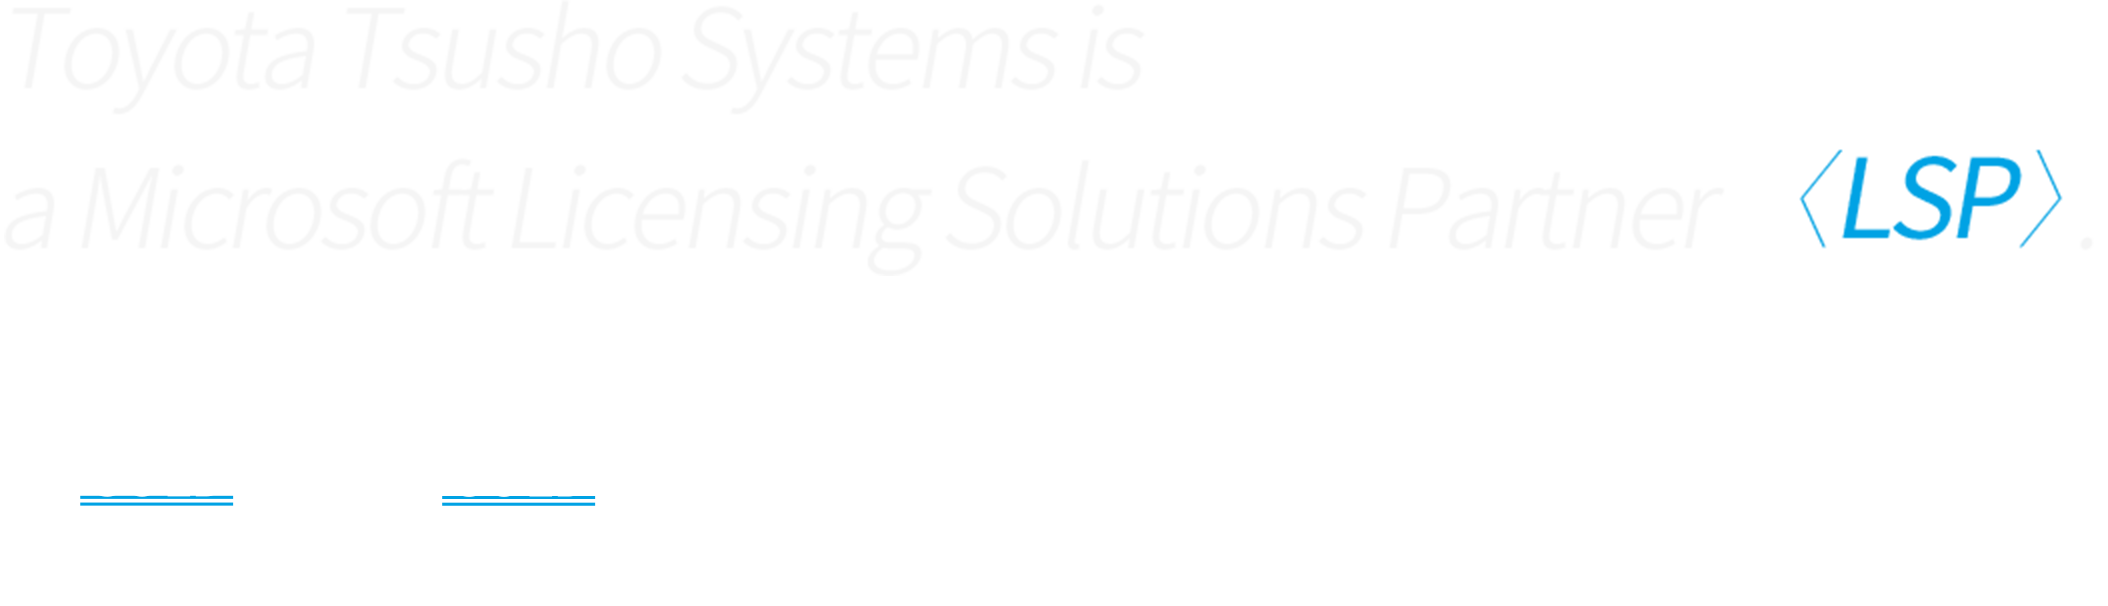 Toyota Tsusho Systems is a Microsoft Licensing Solutions Partner 〈LSP〉.